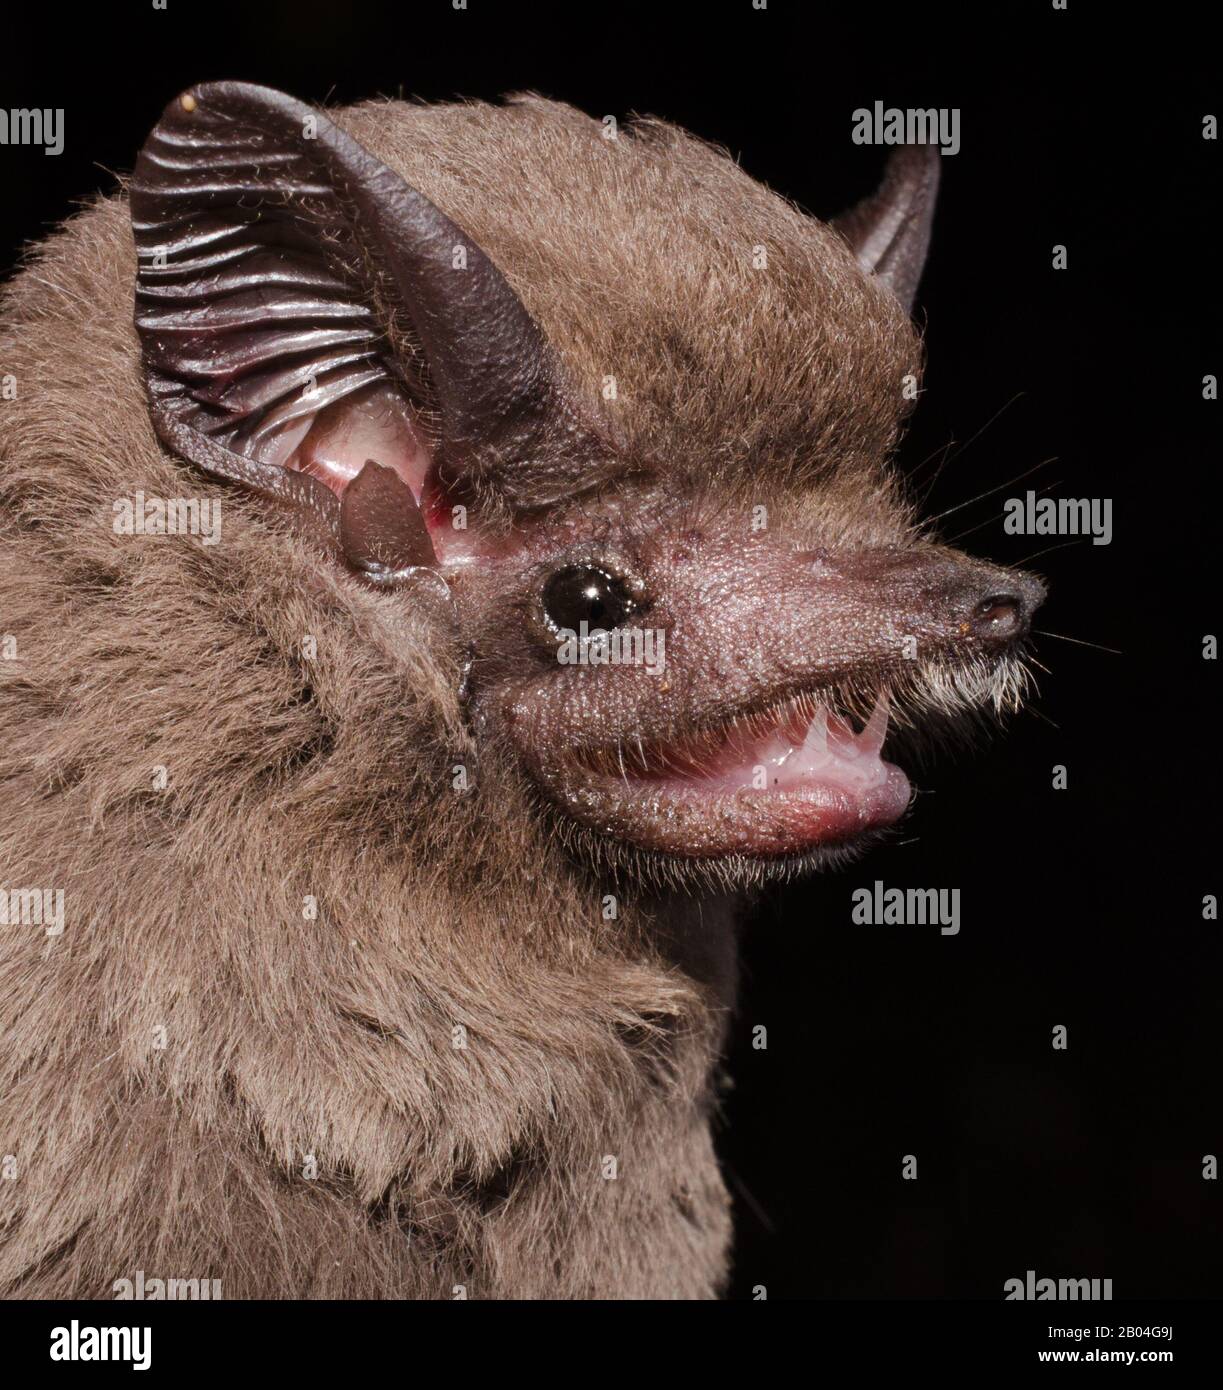 Porttrait of Brazilian bat The greater dog-like bat (Peropteryx kappleri) is a bat species from Central America and South America. Stock Photo